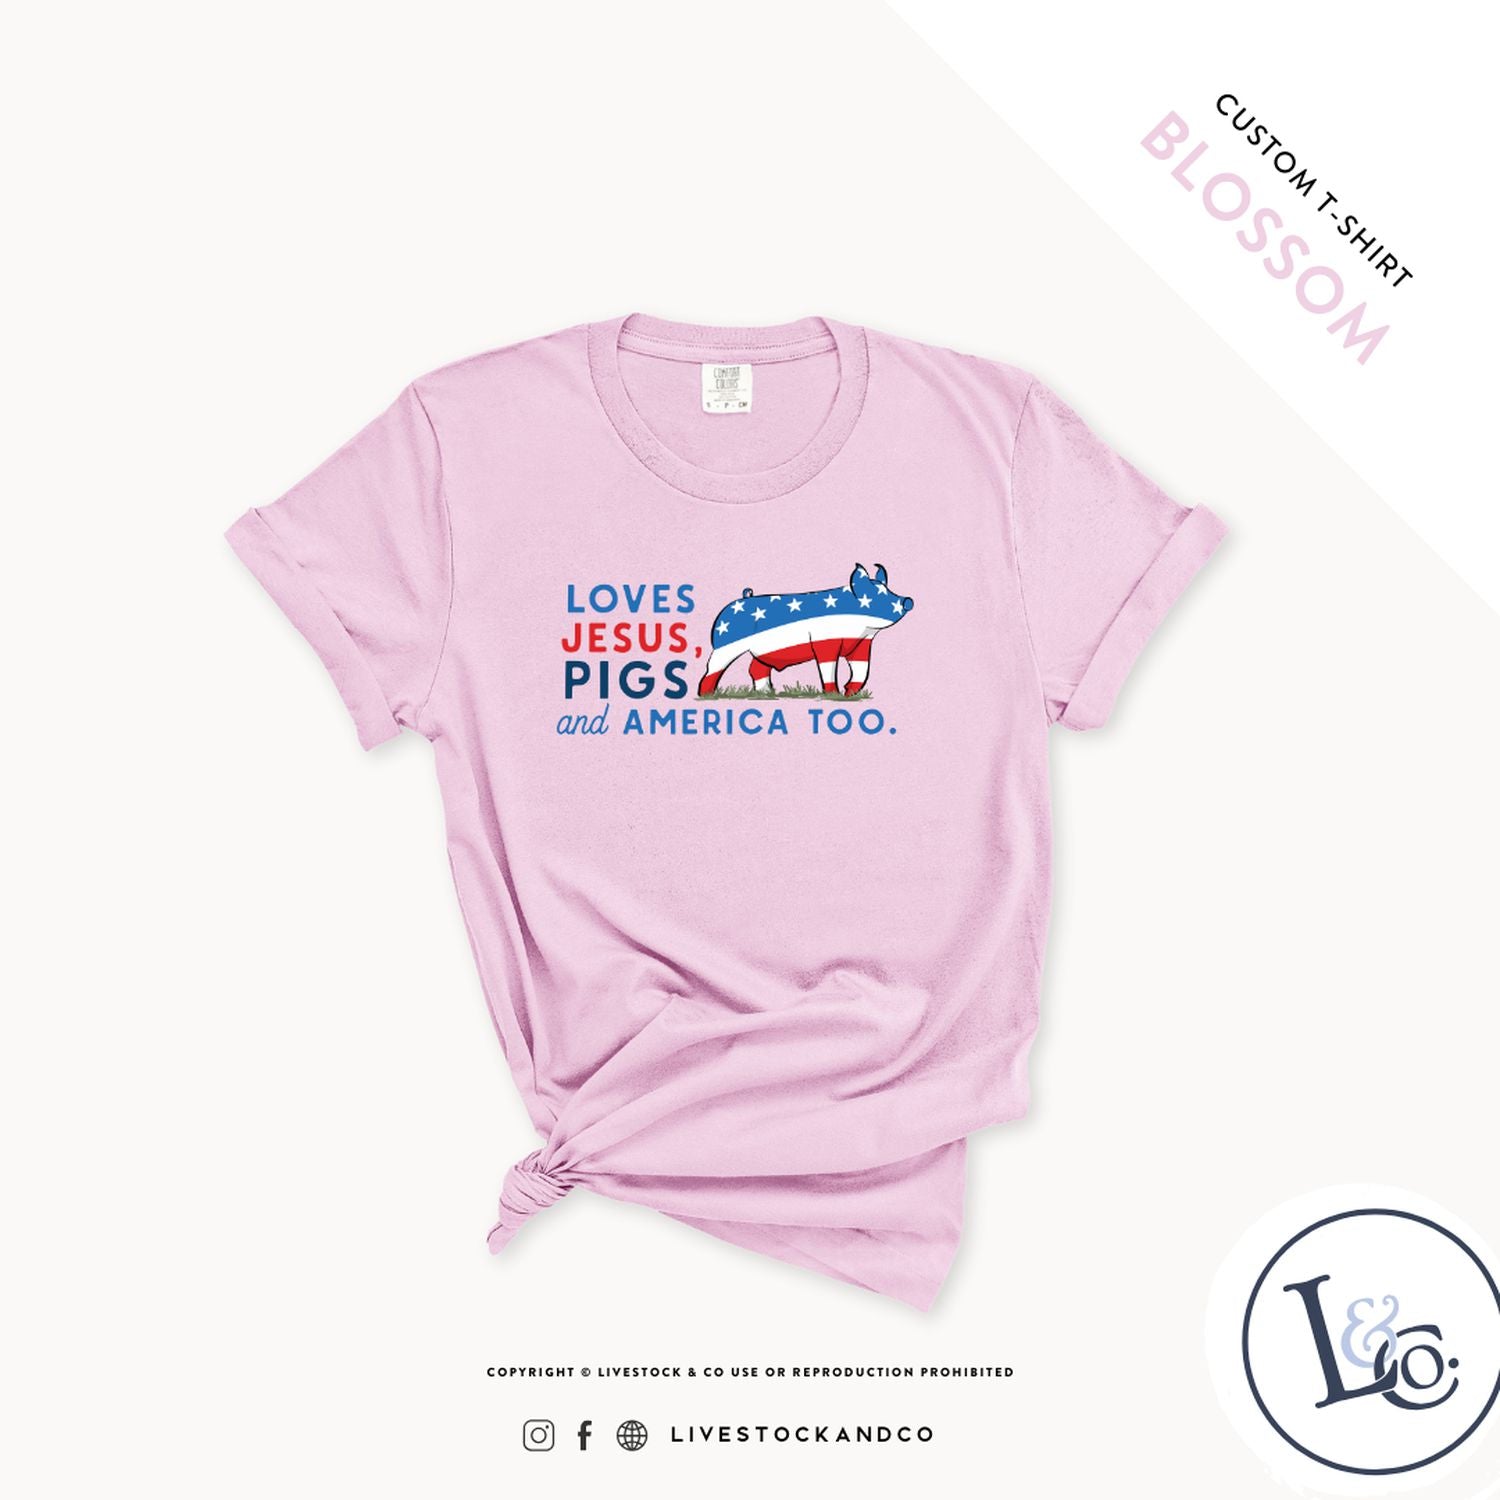 Custom Made Loves Jesus, Pigs and America Too - Adult T-Shirt Stock Show Livestock - Livestock &amp; Co. Boutique